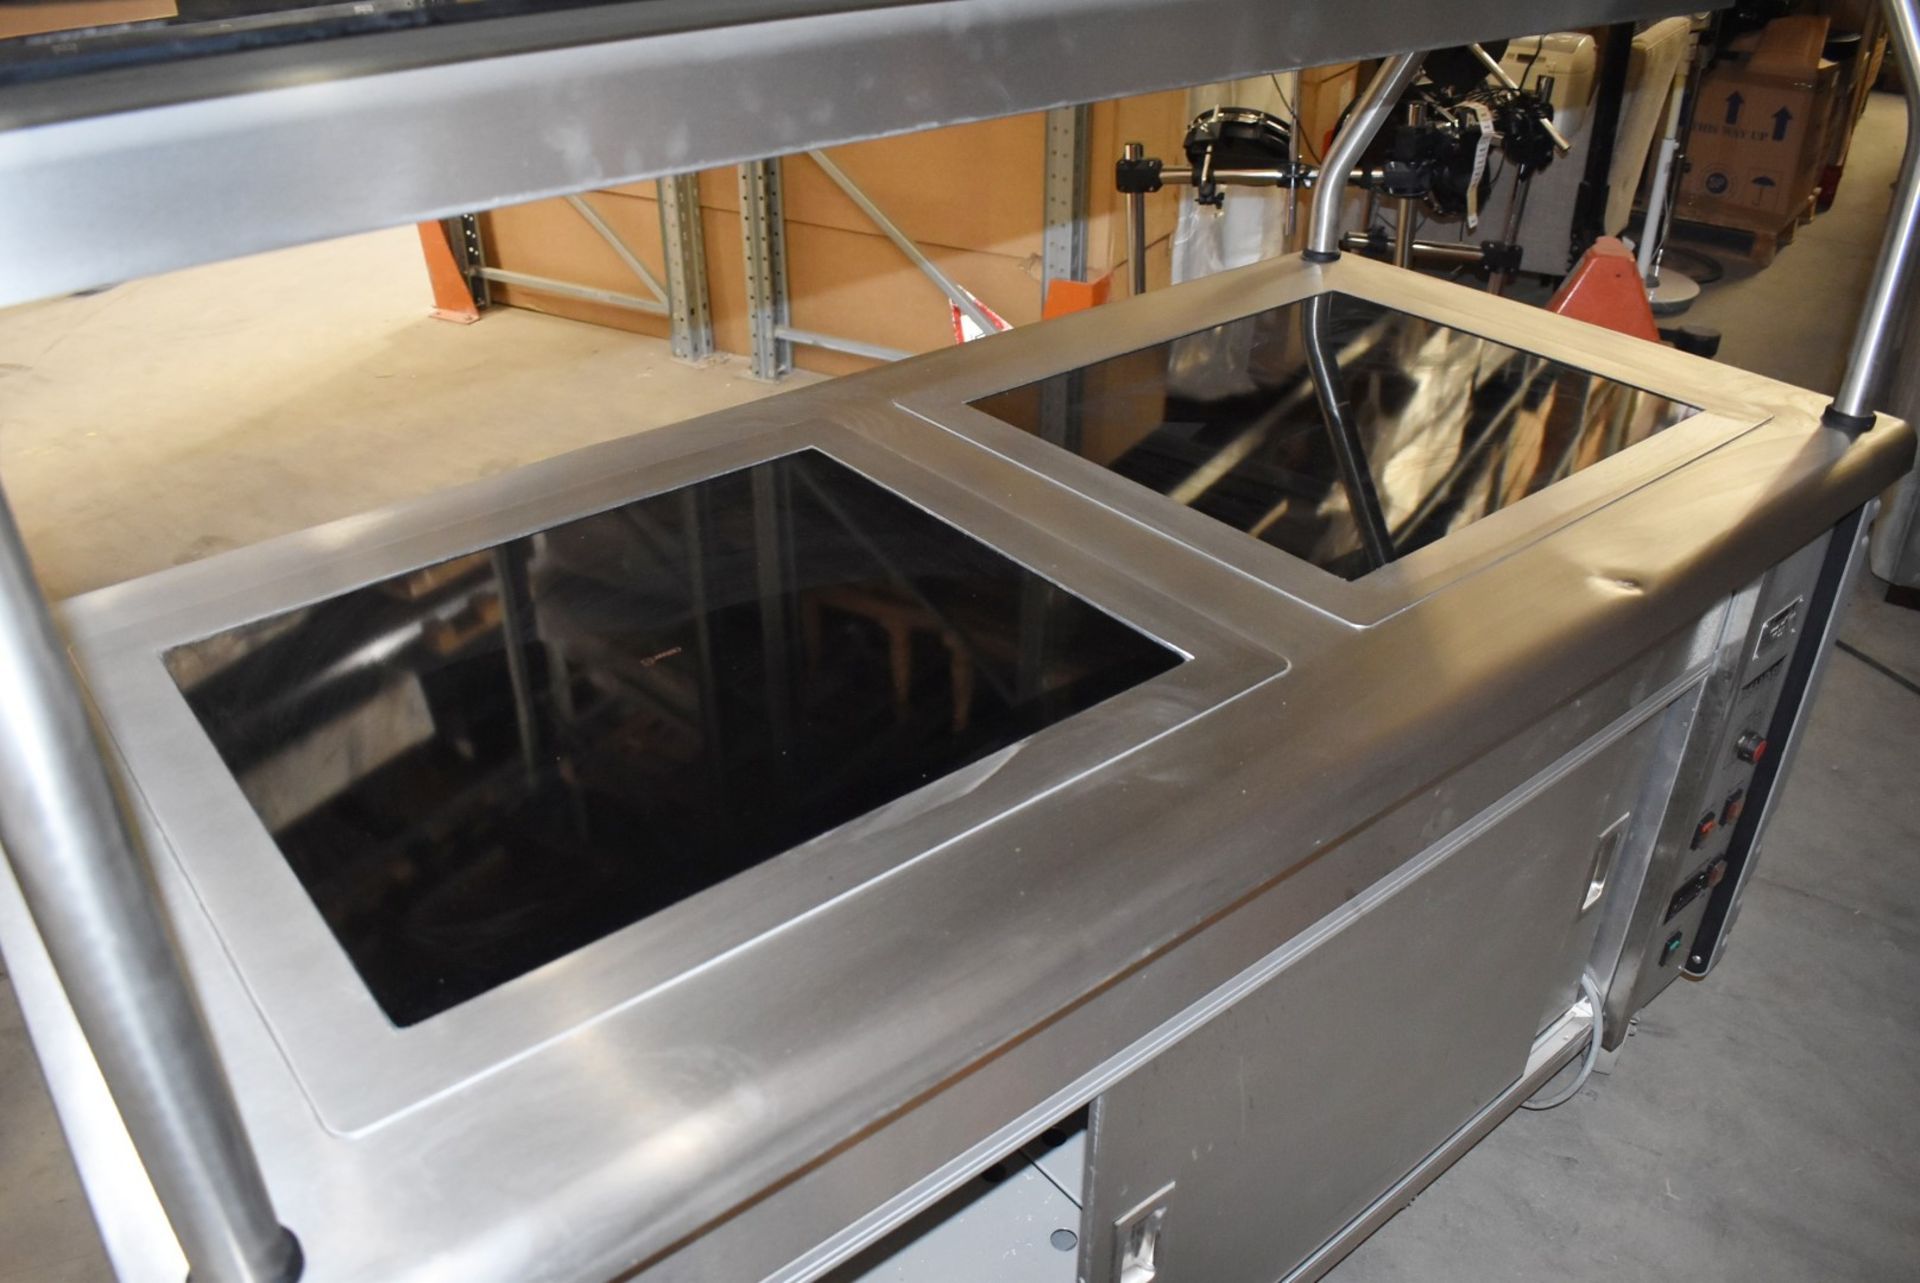 1 x Grundy Commercial Carvery Unit With Twin Hot Plates, Overhead Warmer and Plate Warming Cabinet - Image 9 of 21